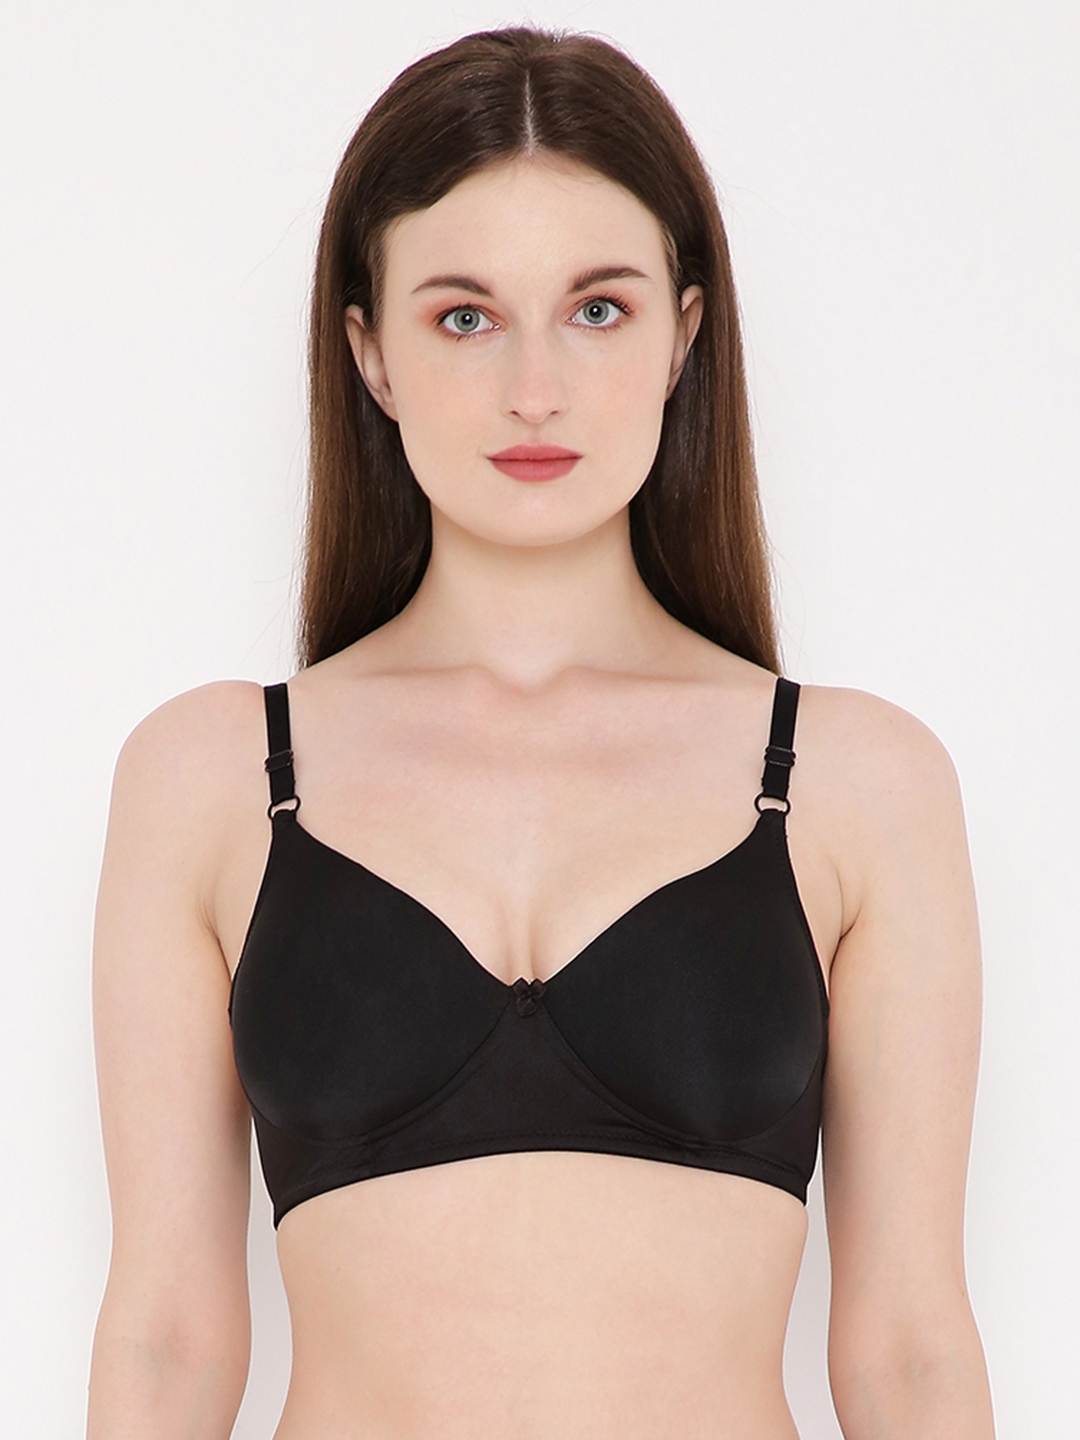 Buy Berrys Intimatess Non Wired Heavily Padded With Medium Coverage T Shirt Bra Bra For